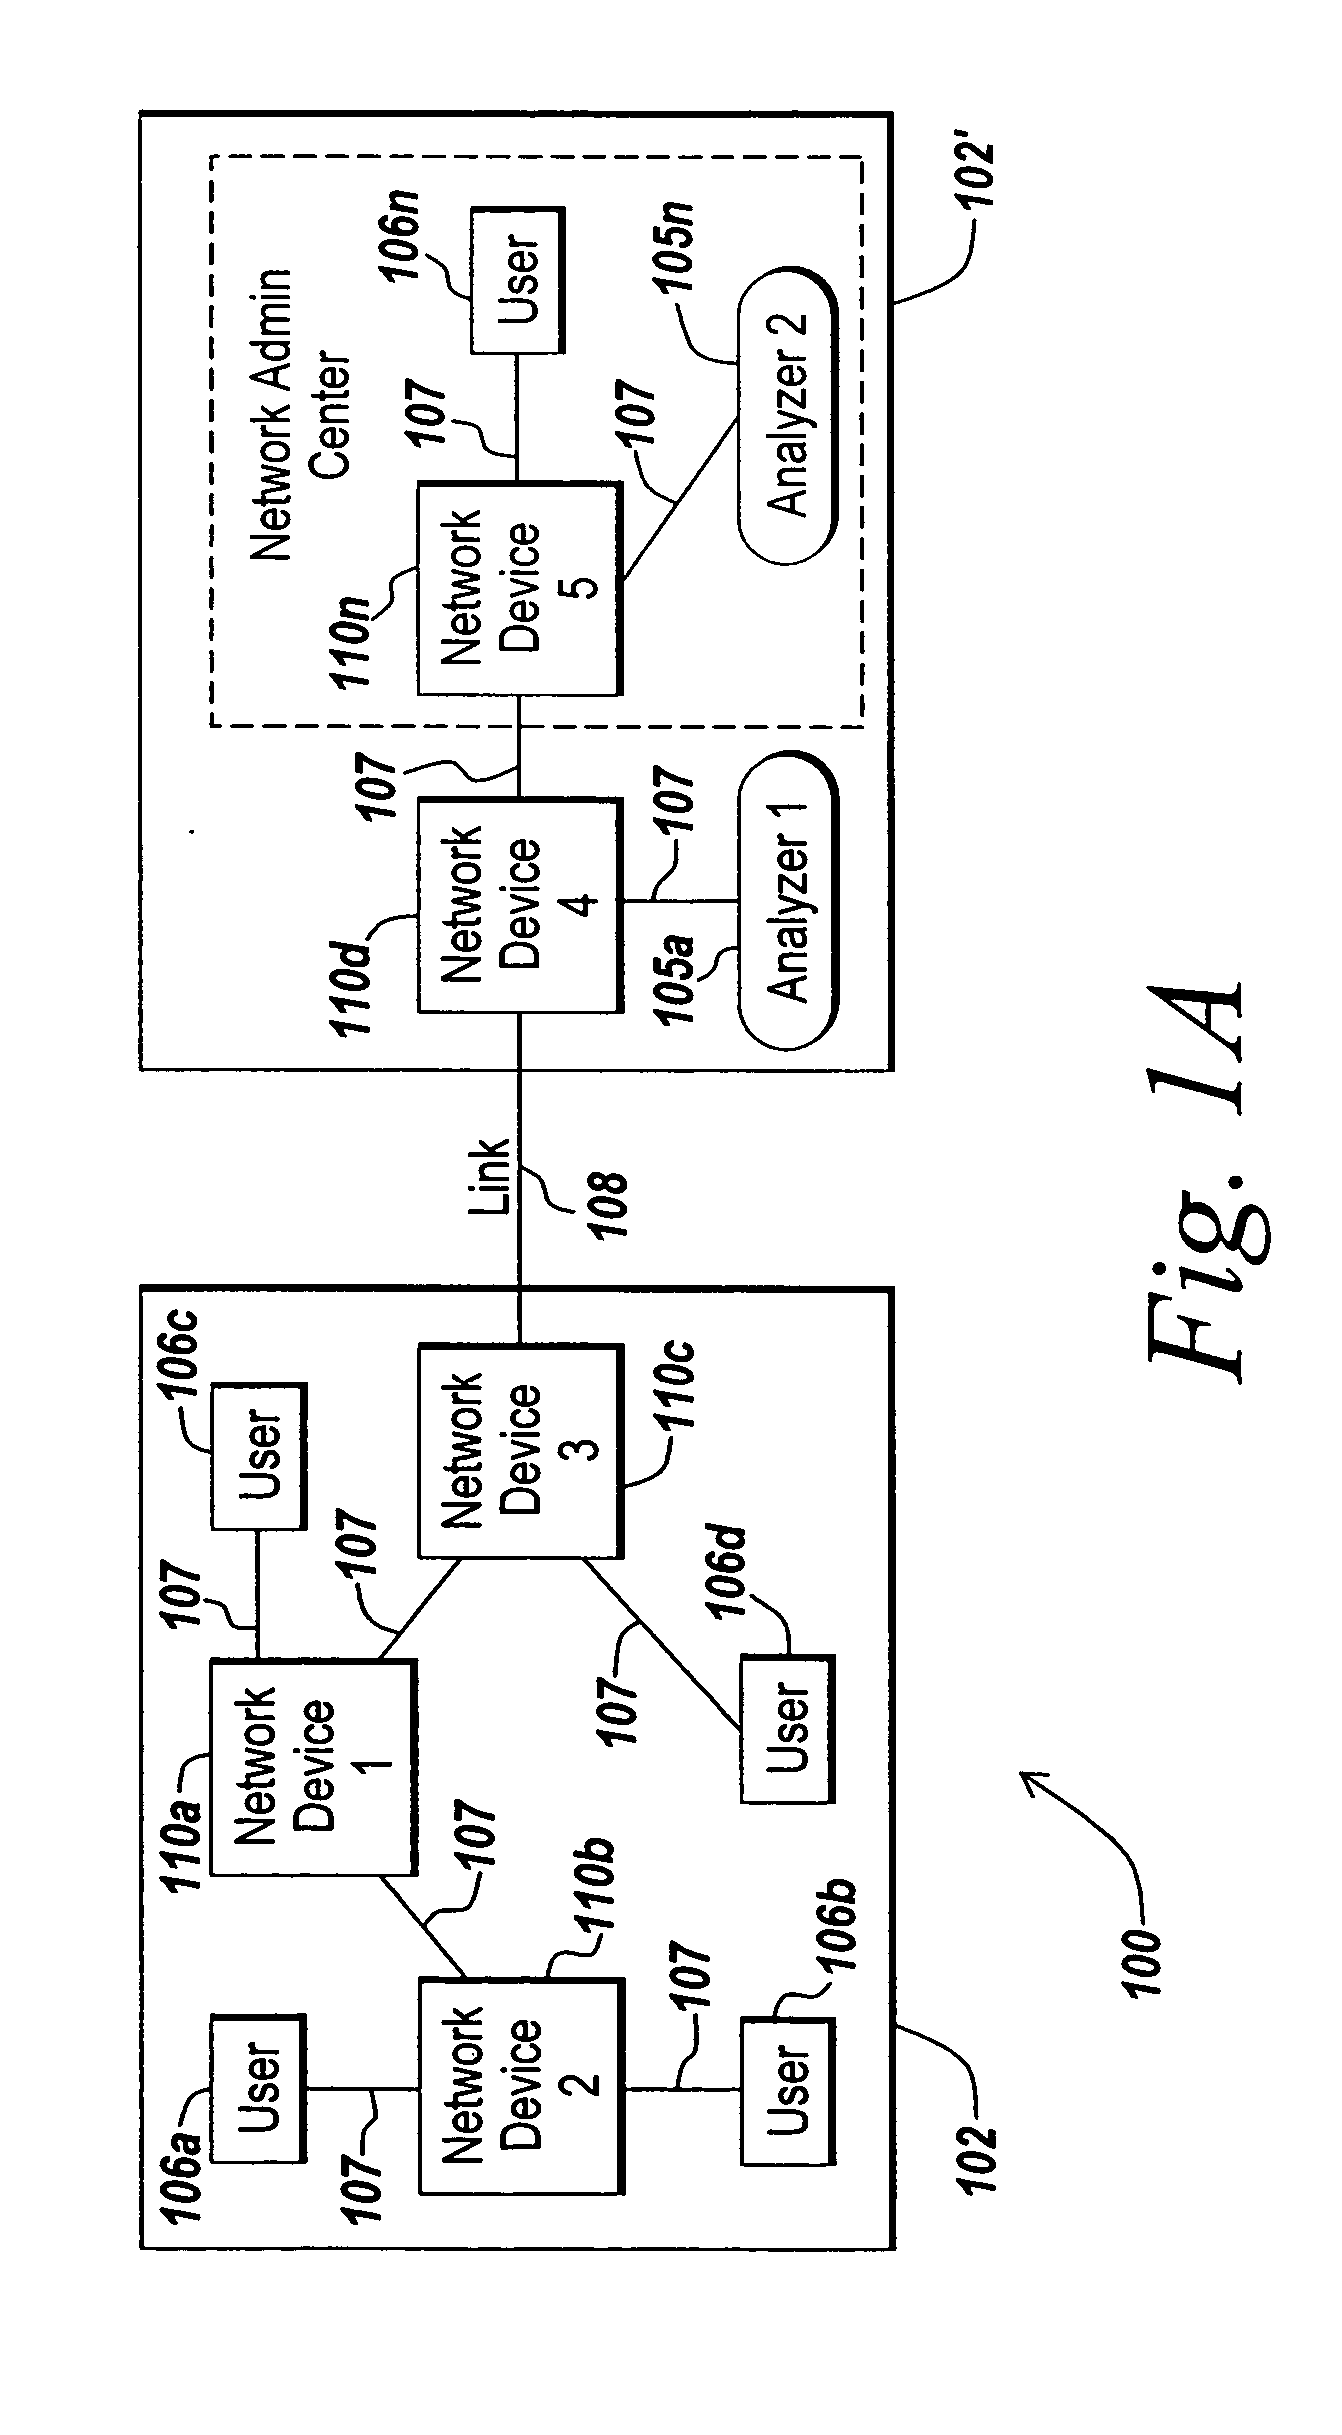 Method for network traffic mirroring with data privacy